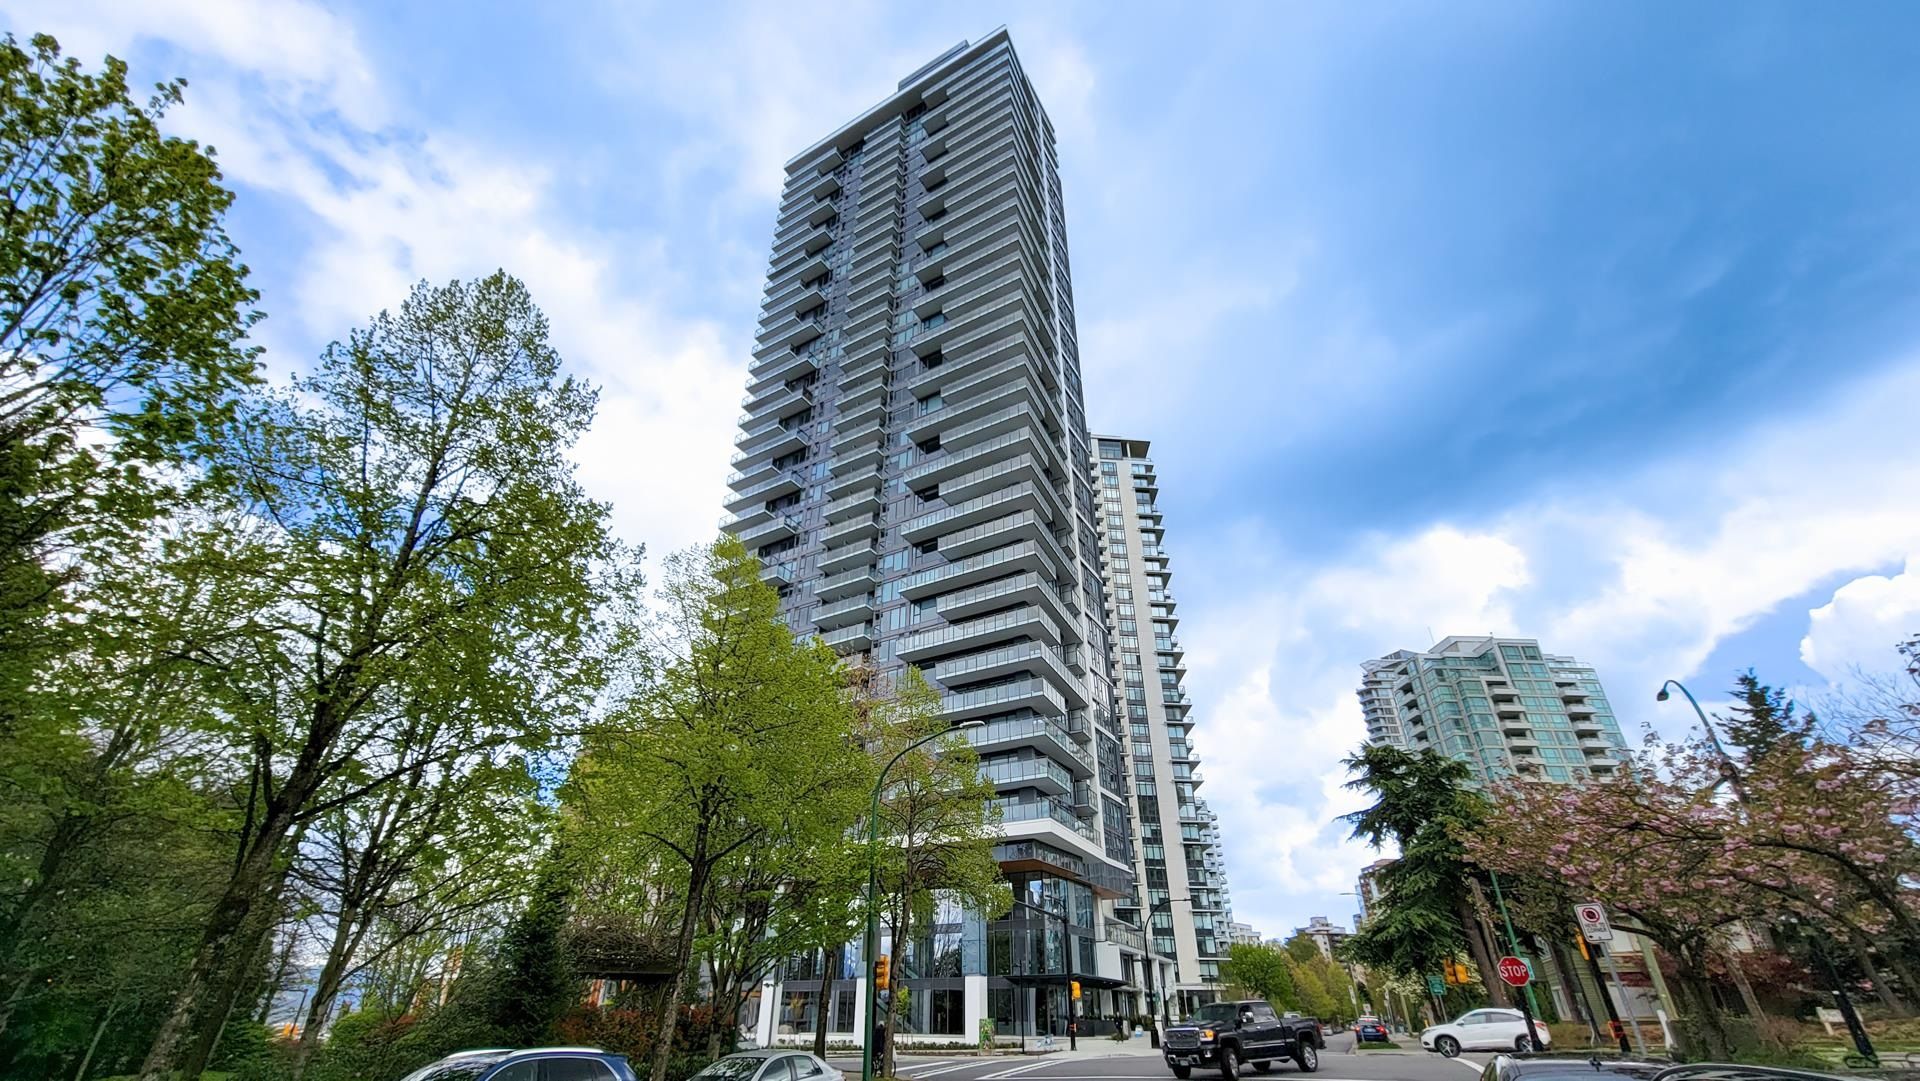 Main Photo: 2401 4711 HAZEL Street in Burnaby: Forest Glen BS Condo for sale (Burnaby South)  : MLS®# R2687474